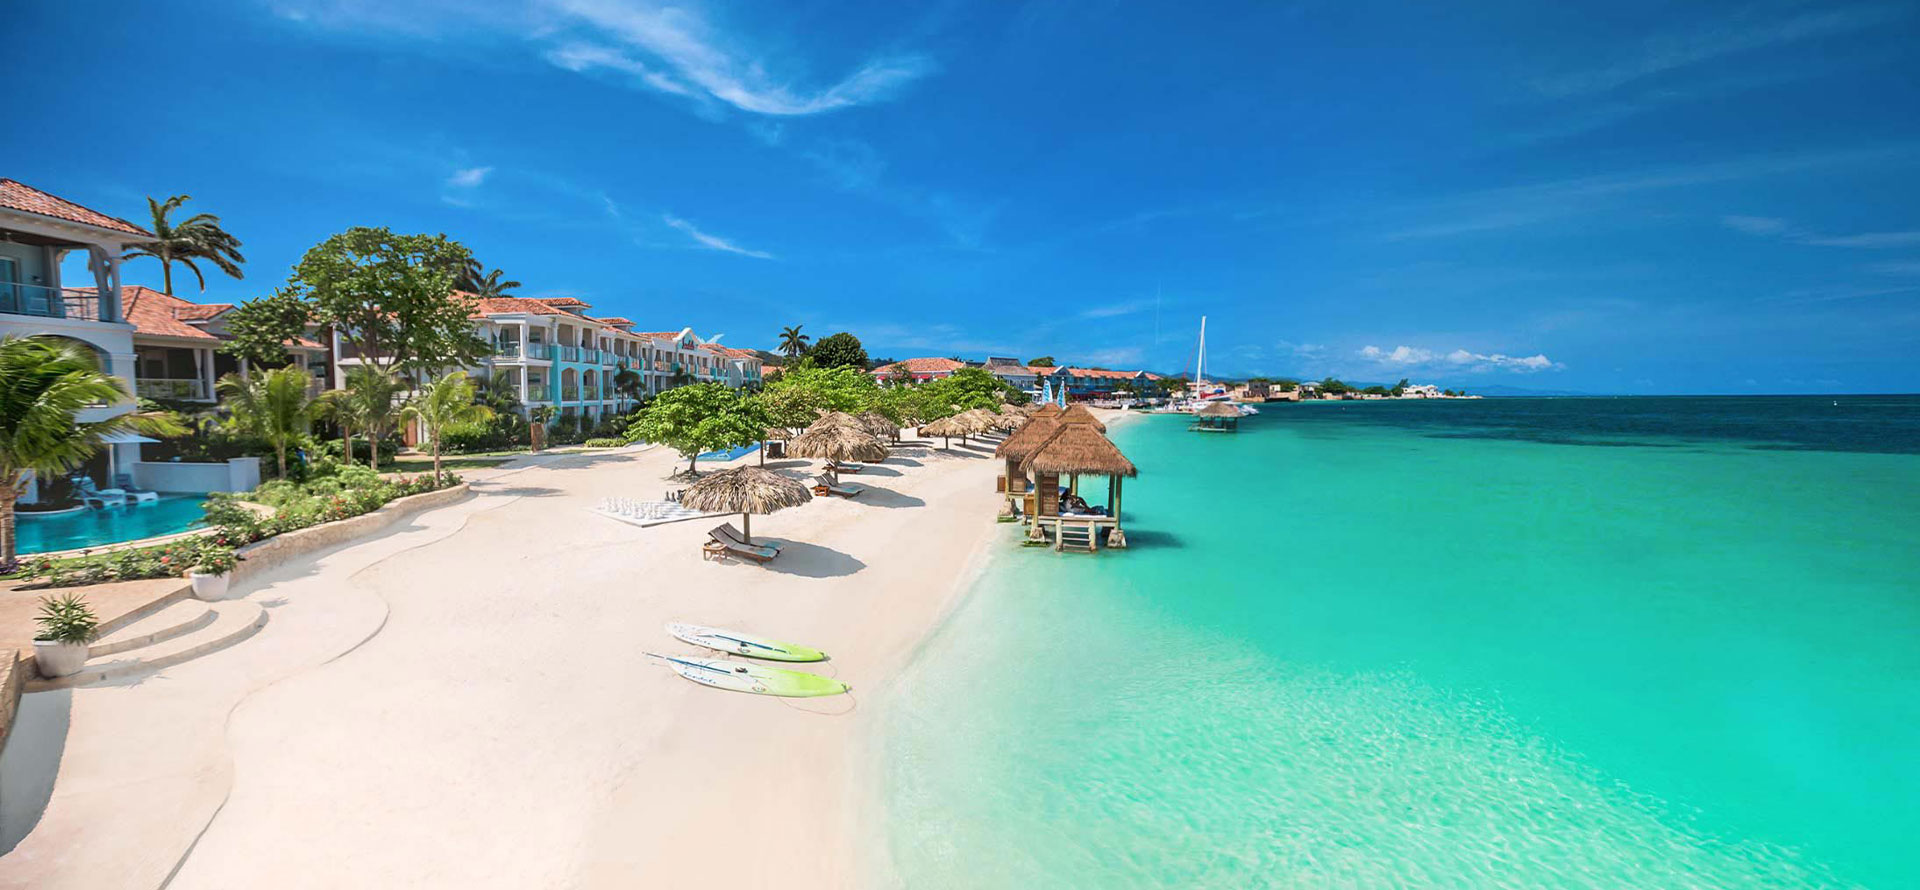 Montego bay all-inclusive adults only resort and beautiful beach.